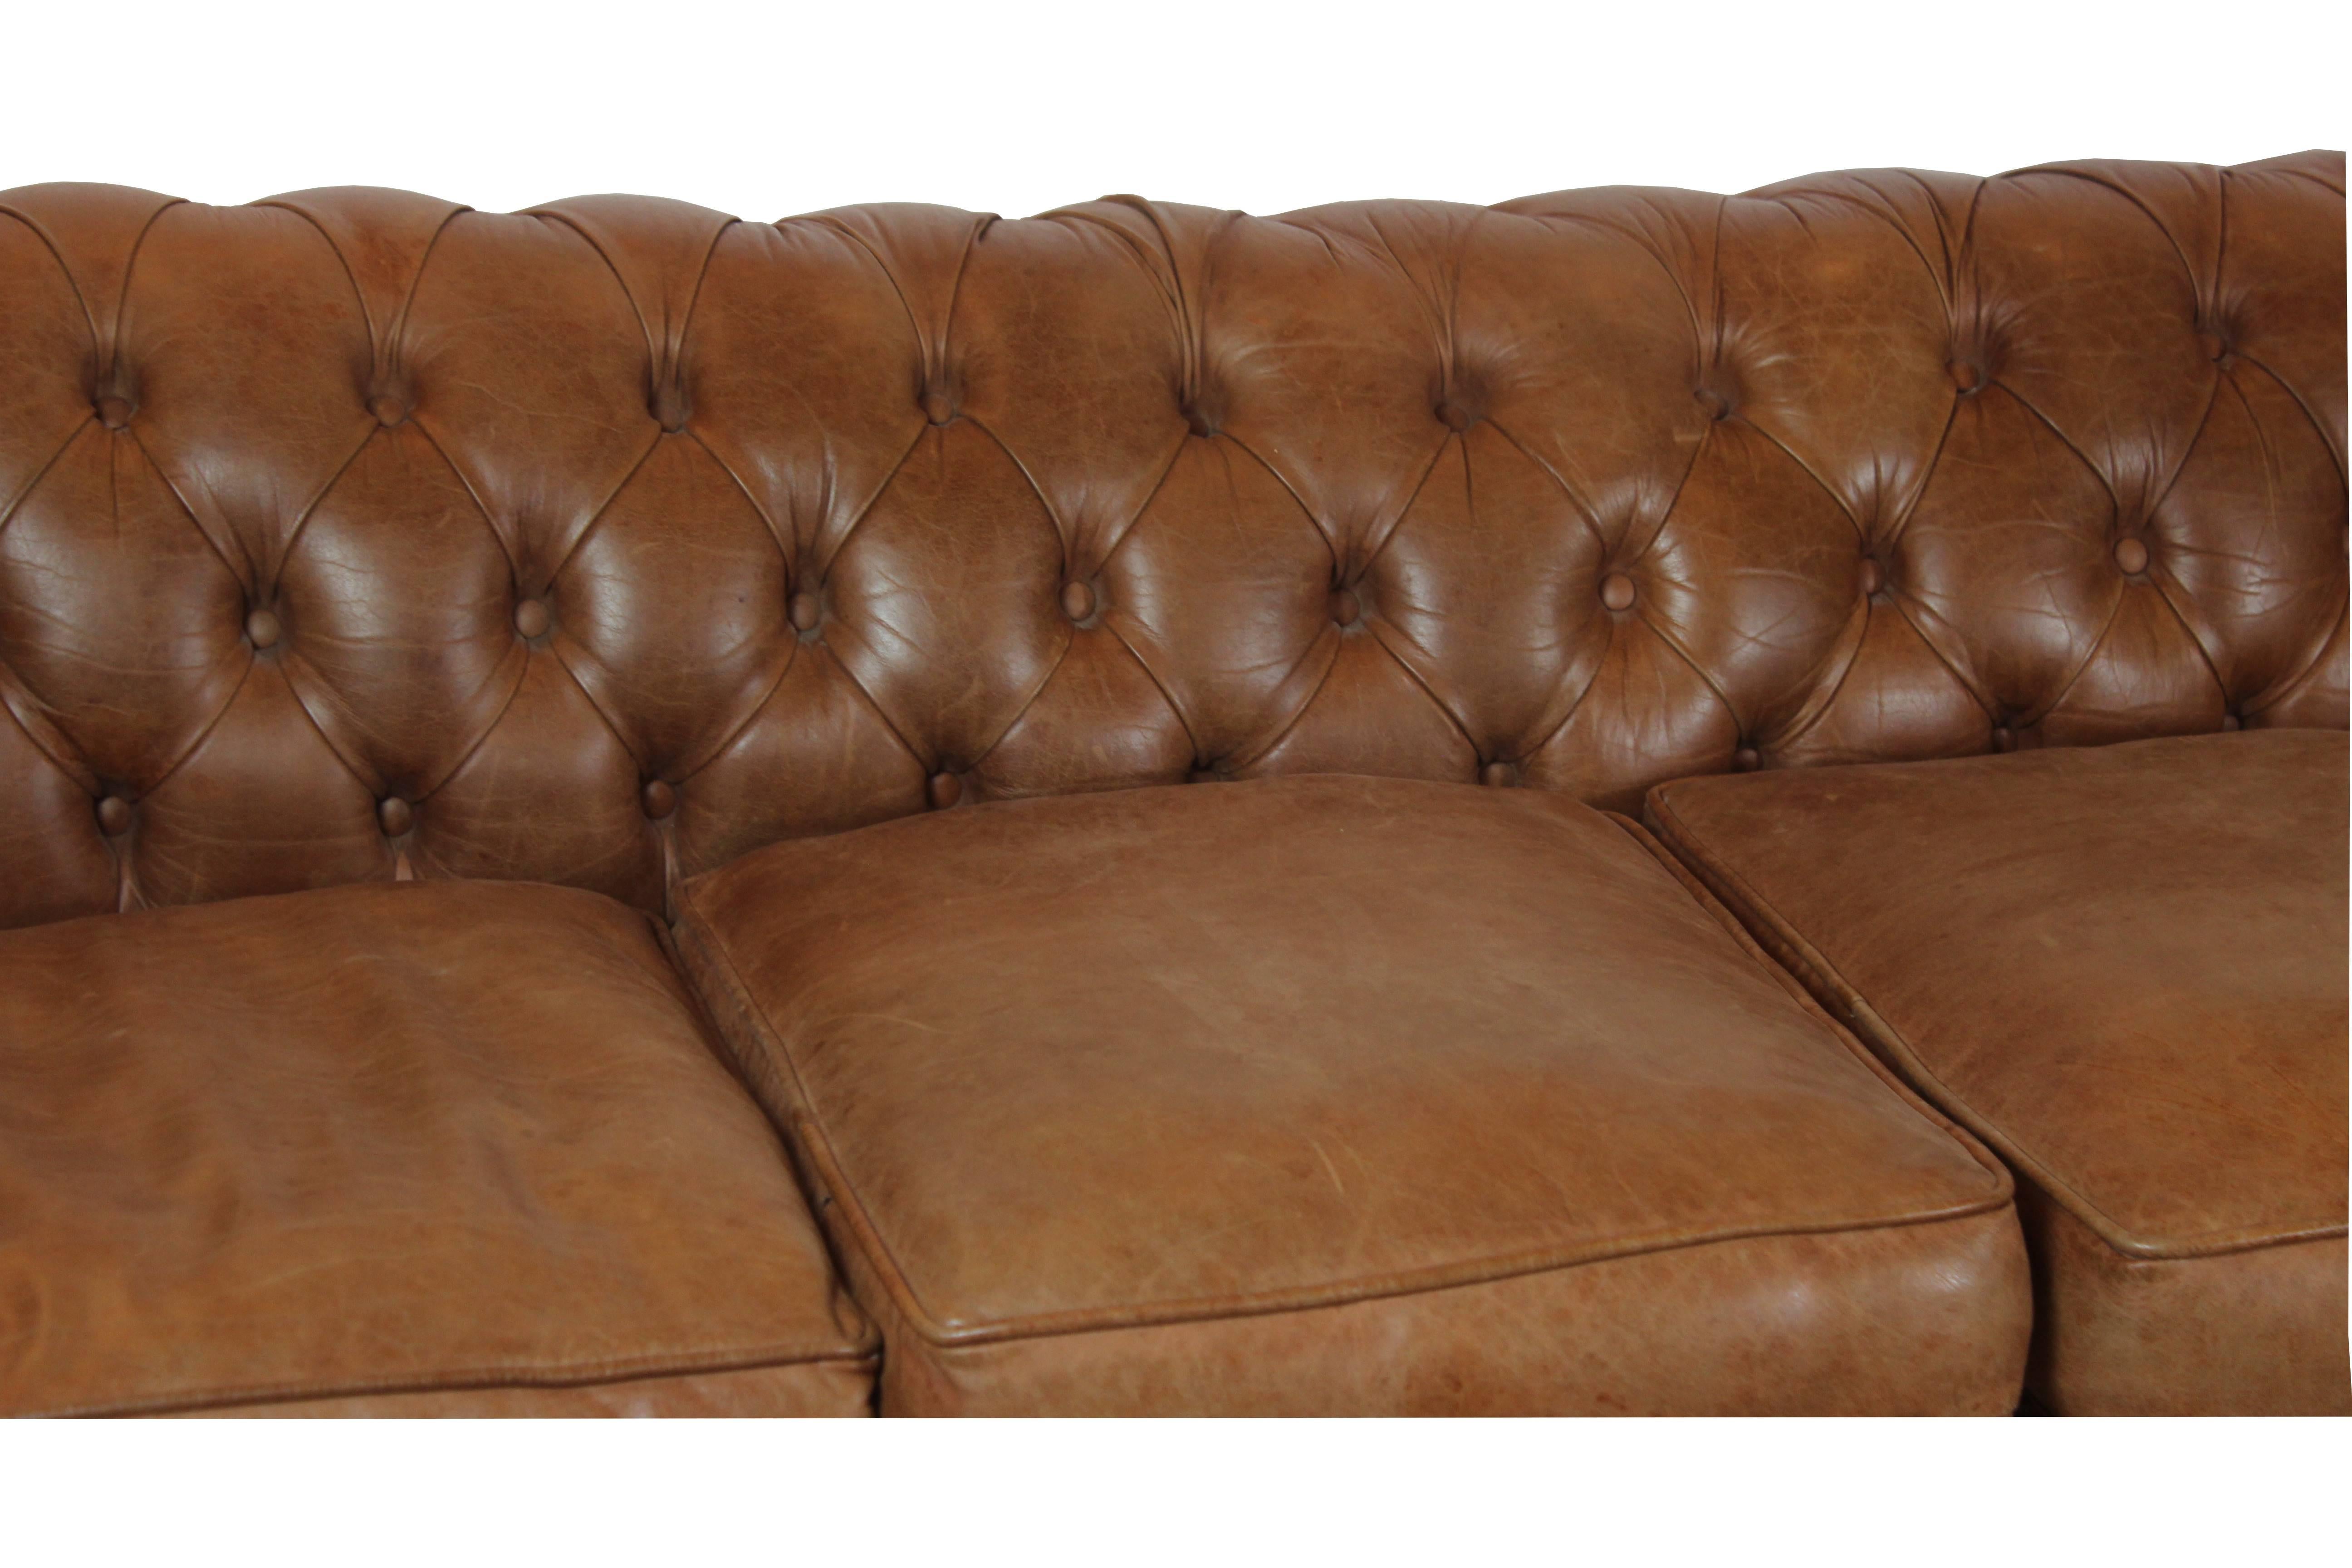 Chesterfield style sofa wonderful quality made with soft leather, four loose cushions and four ball feet.